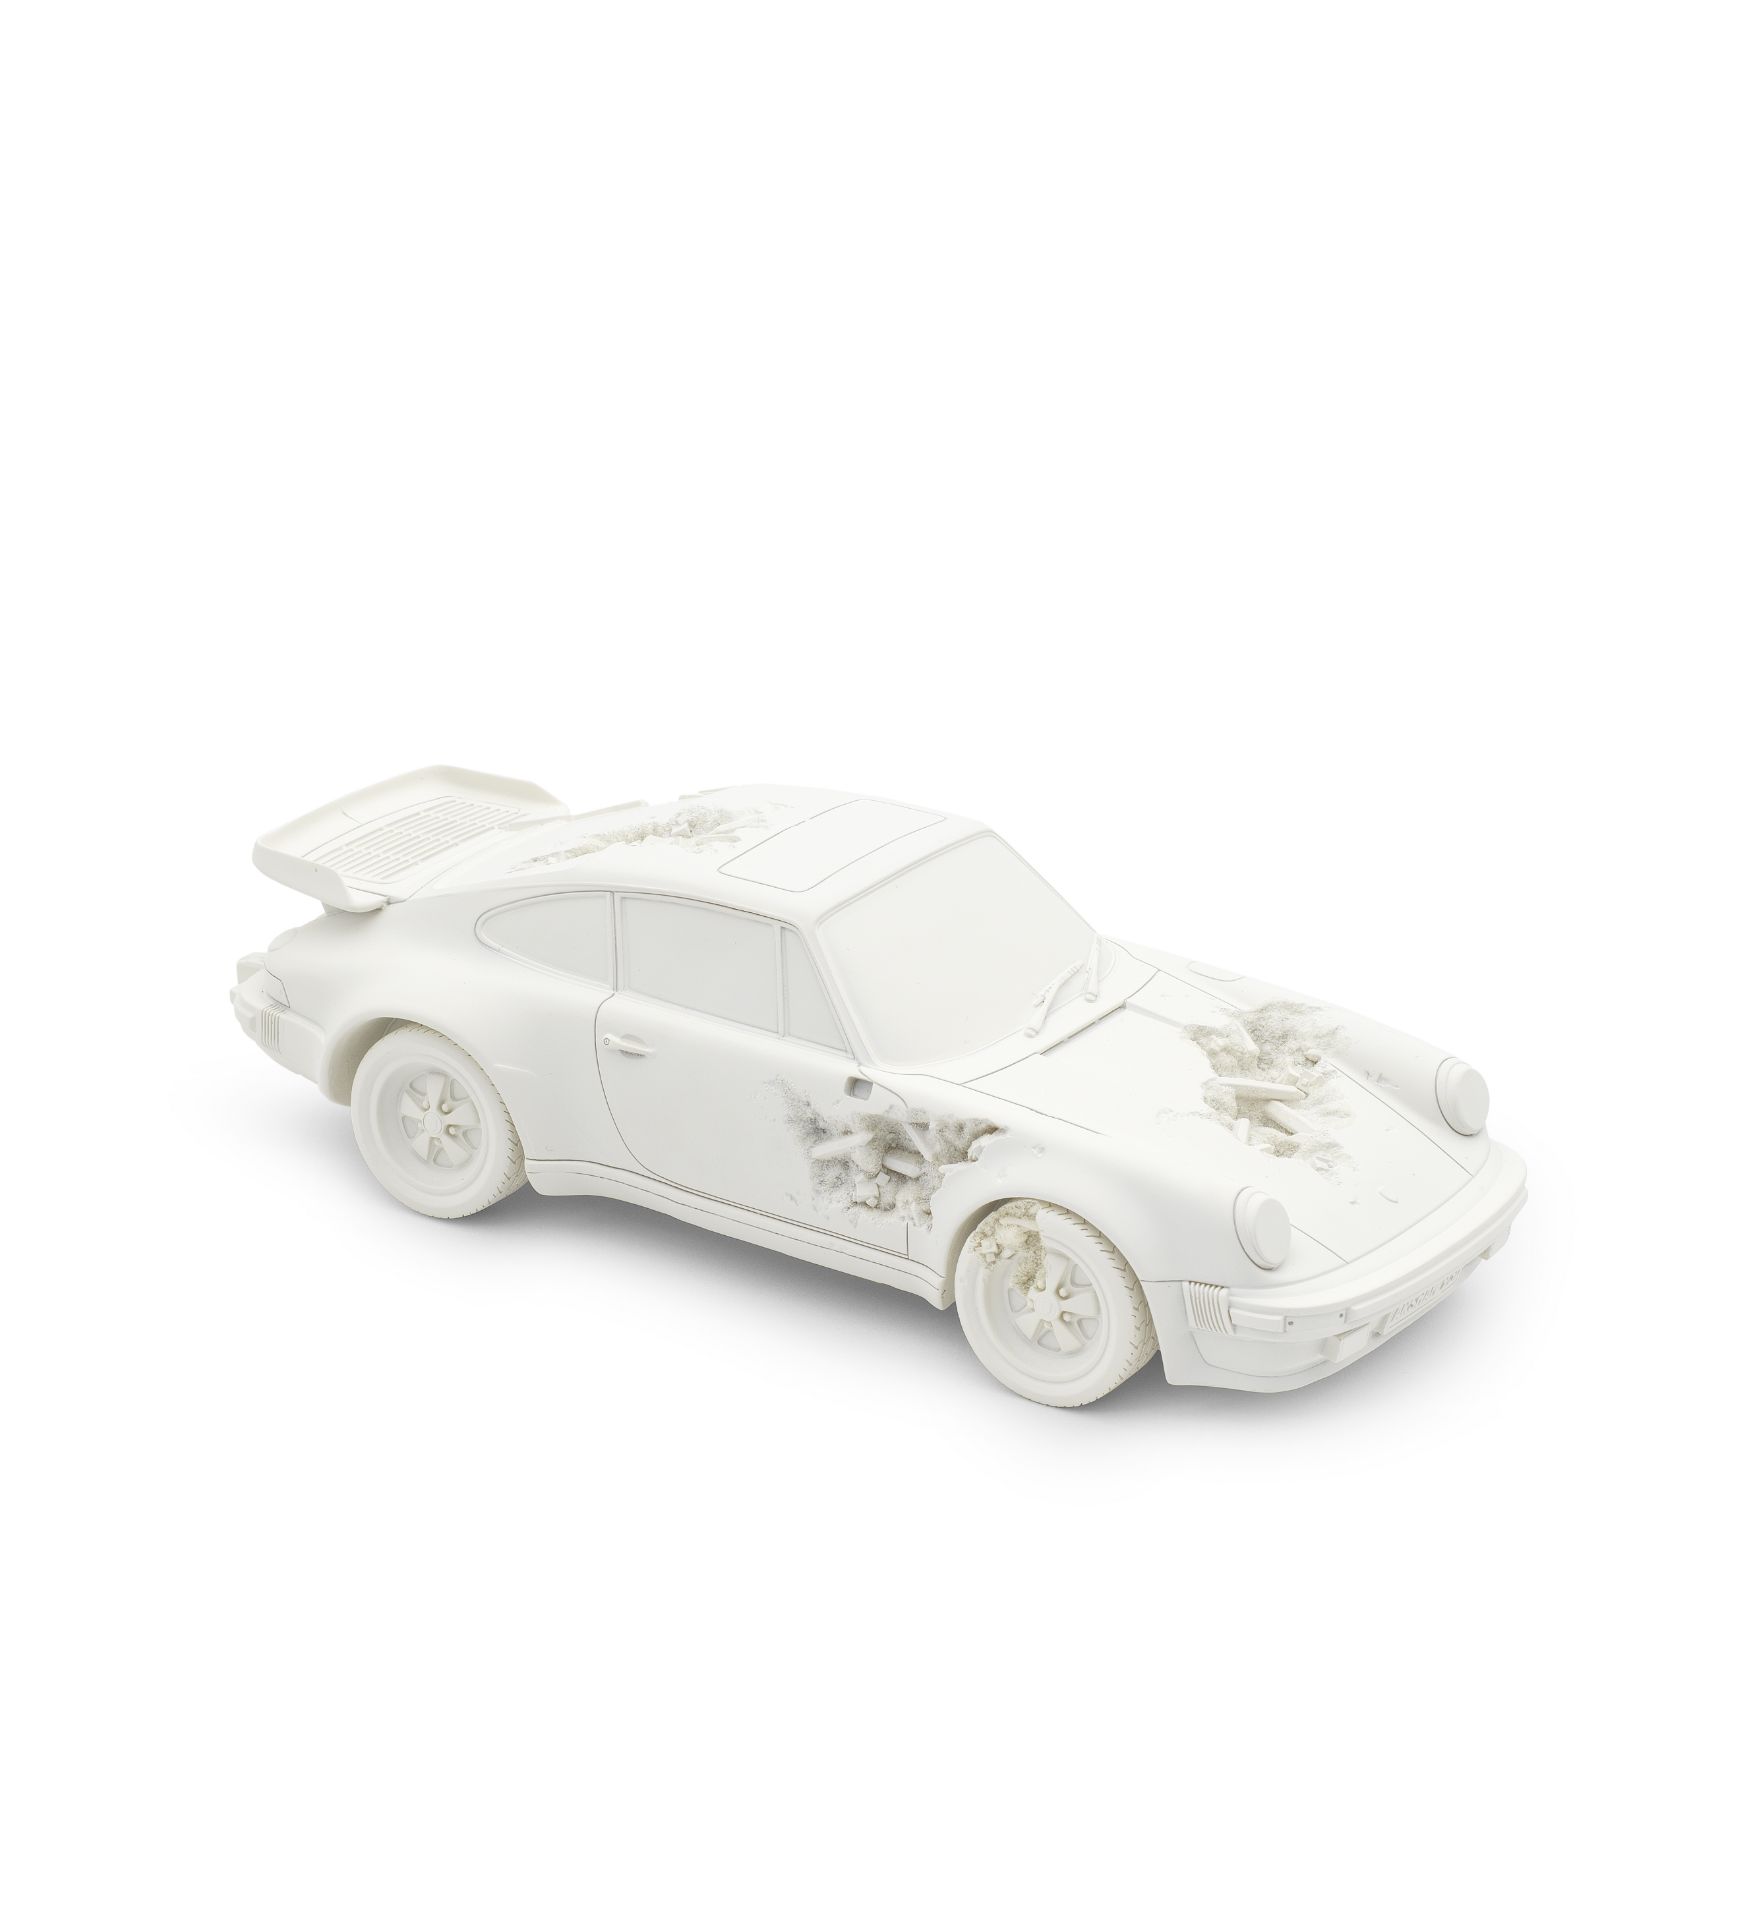 Daniel Arsham Eroded 911 Turbo Porsche, 2020 numbered out of 500 on the holographic label on the...